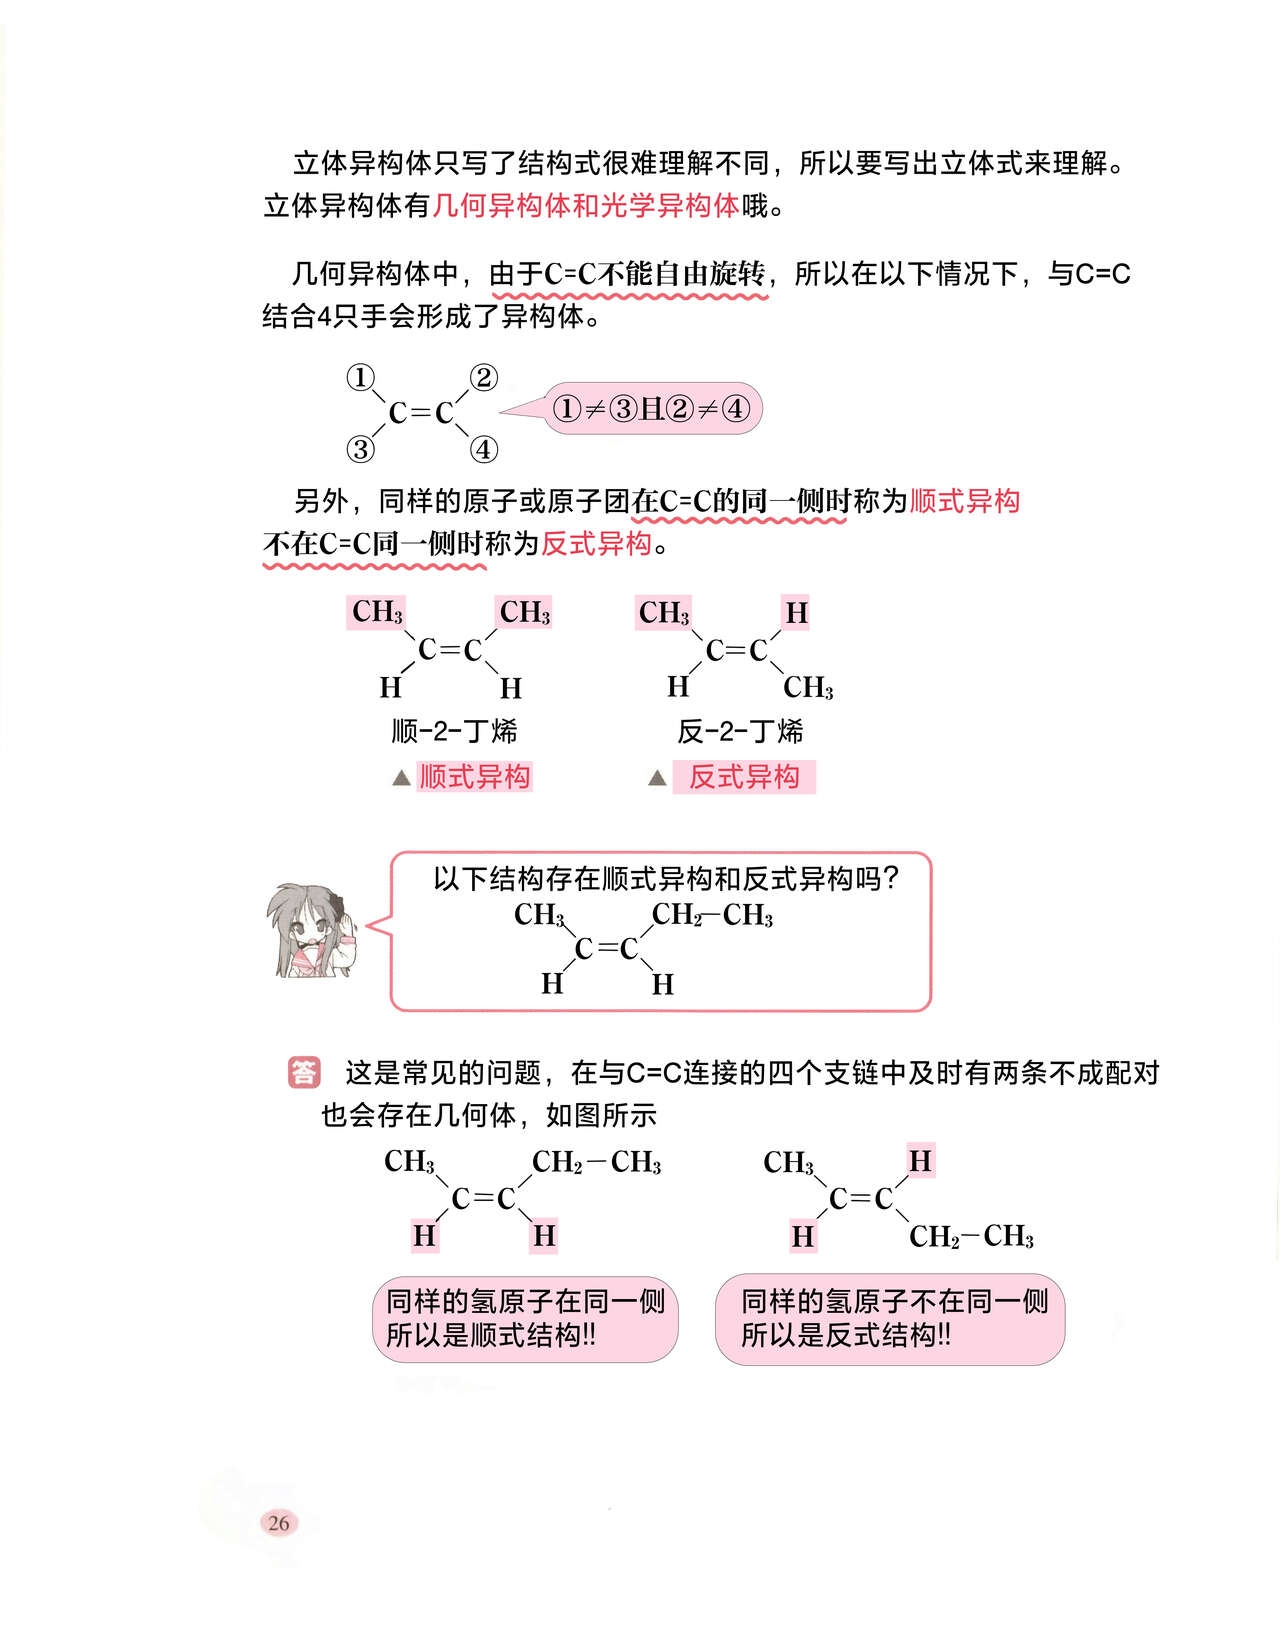 Let's Learn Chemistry with Lucky☆Star -organic matter- Section 1|和幸运星一起学化学 -有机篇- 第1章[Chinese][砂時計漢化組] 34